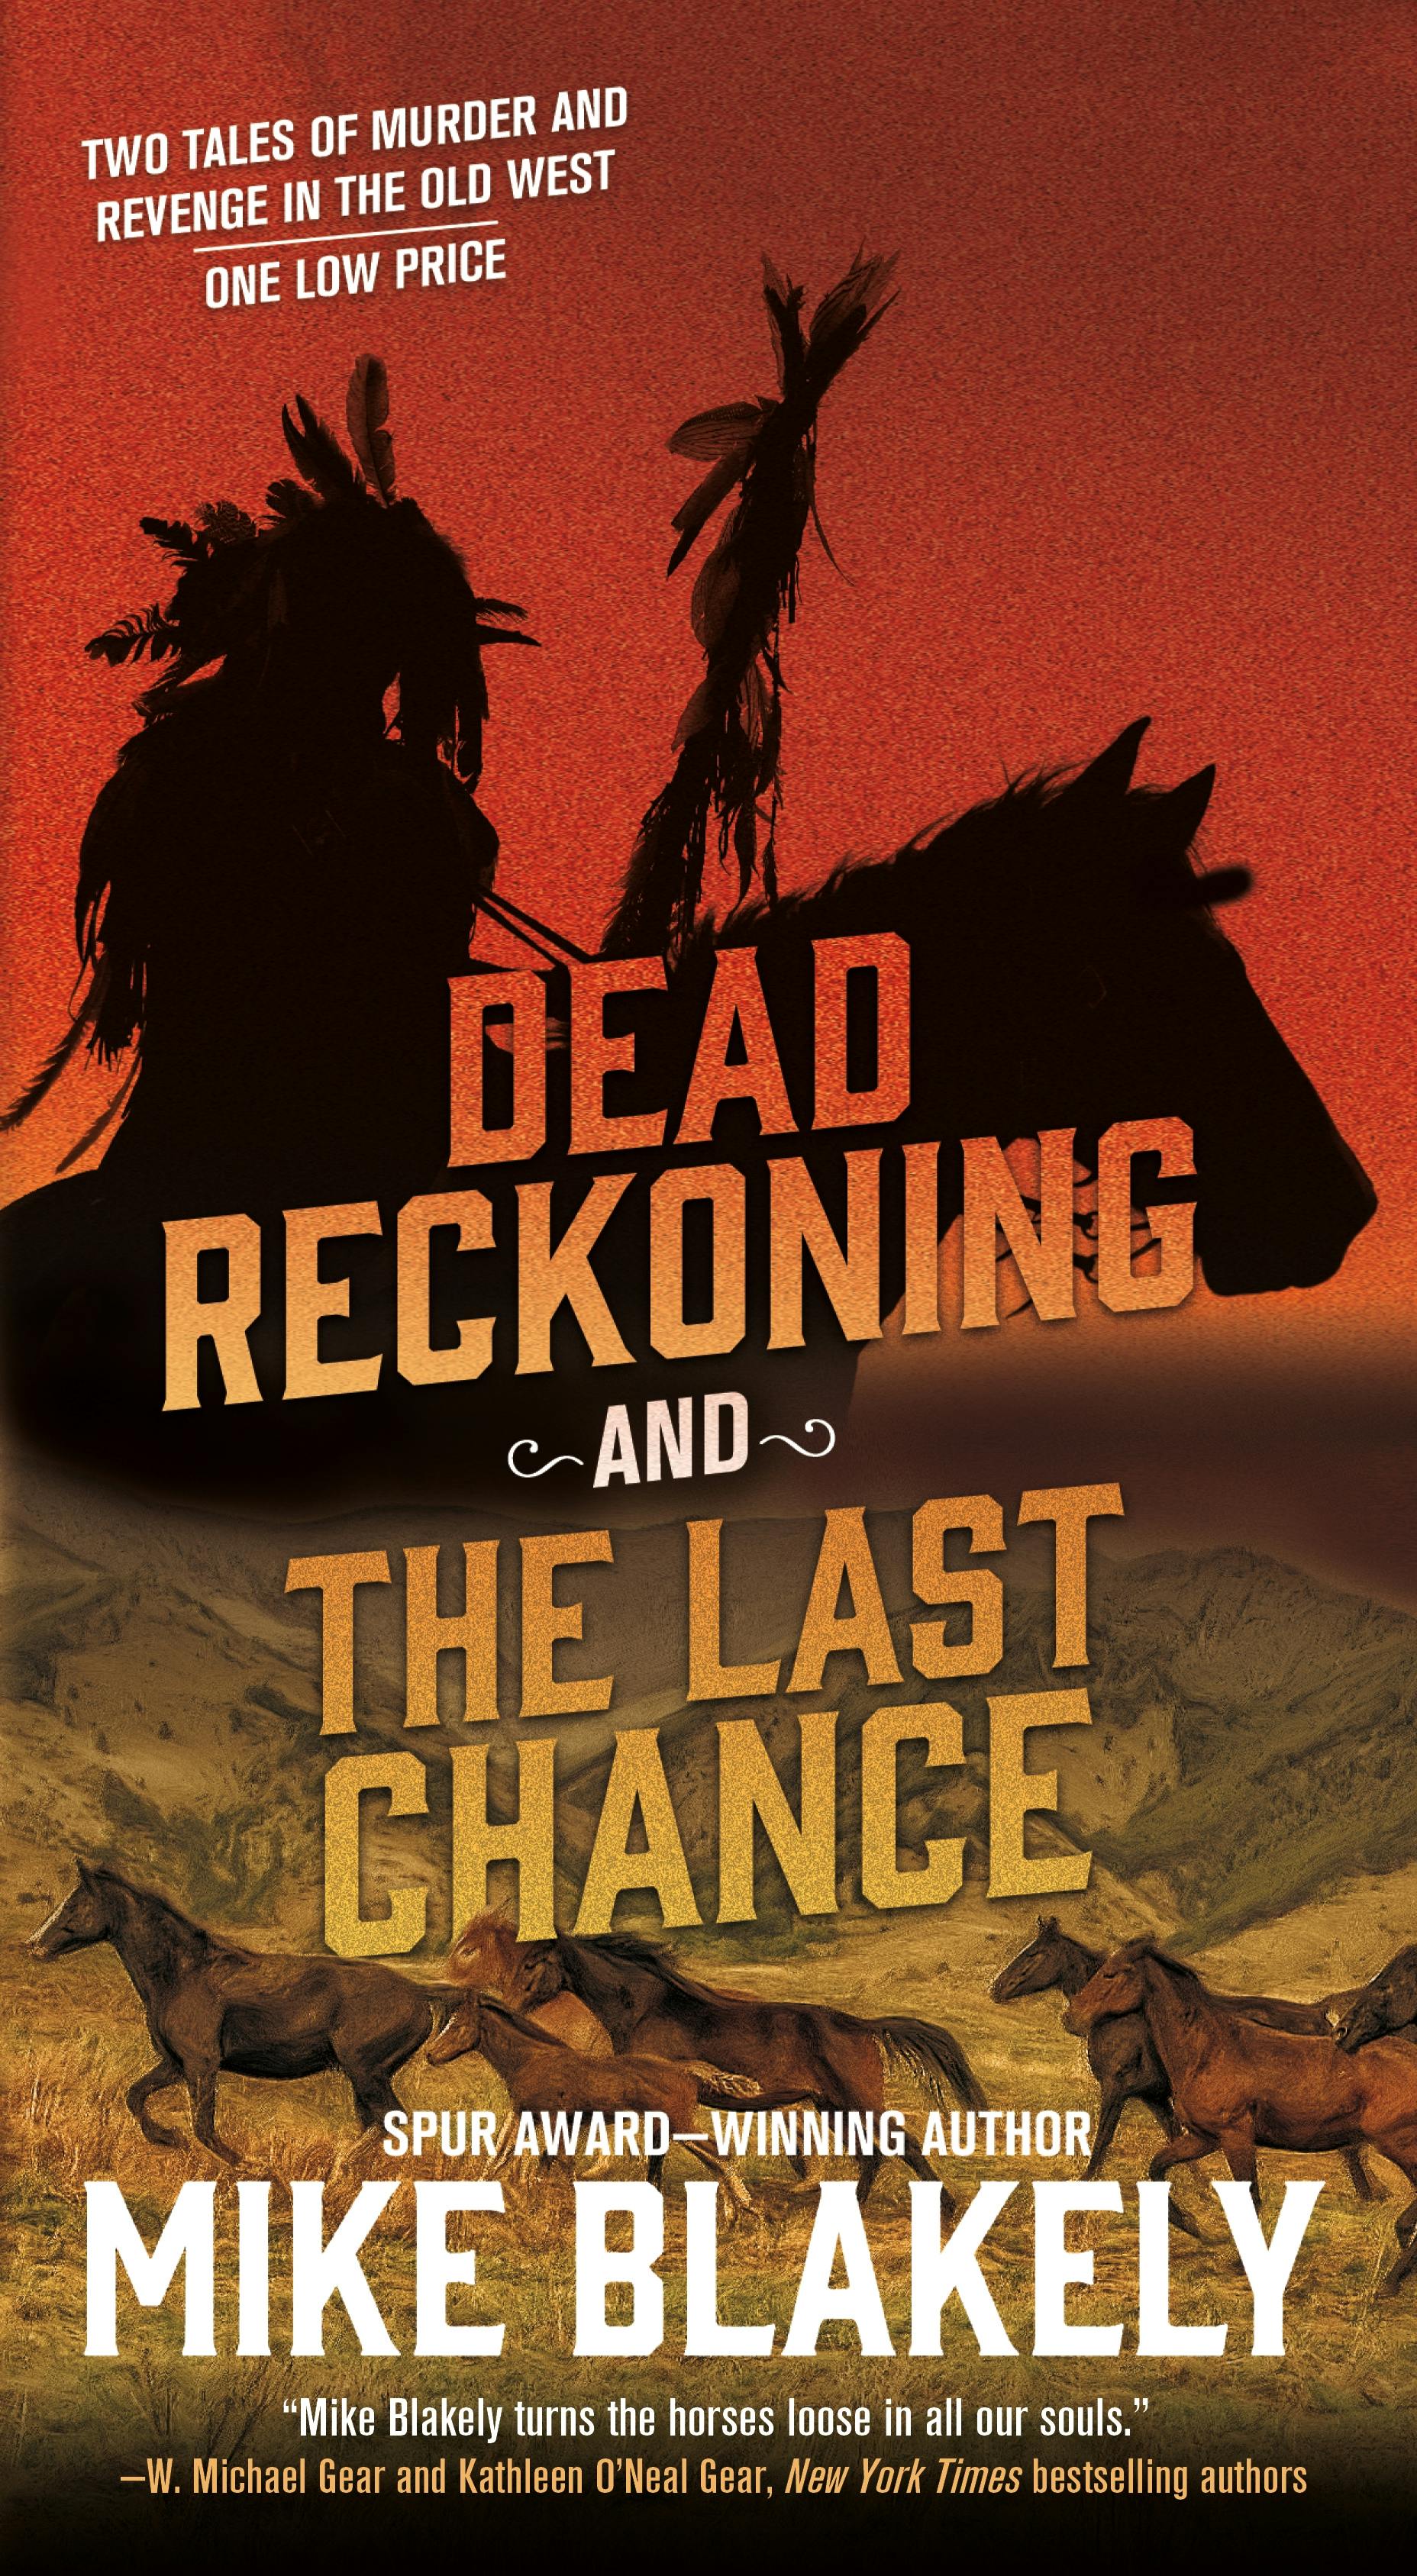 Cover for the book titled as: Dead Reckoning and The Last Chance